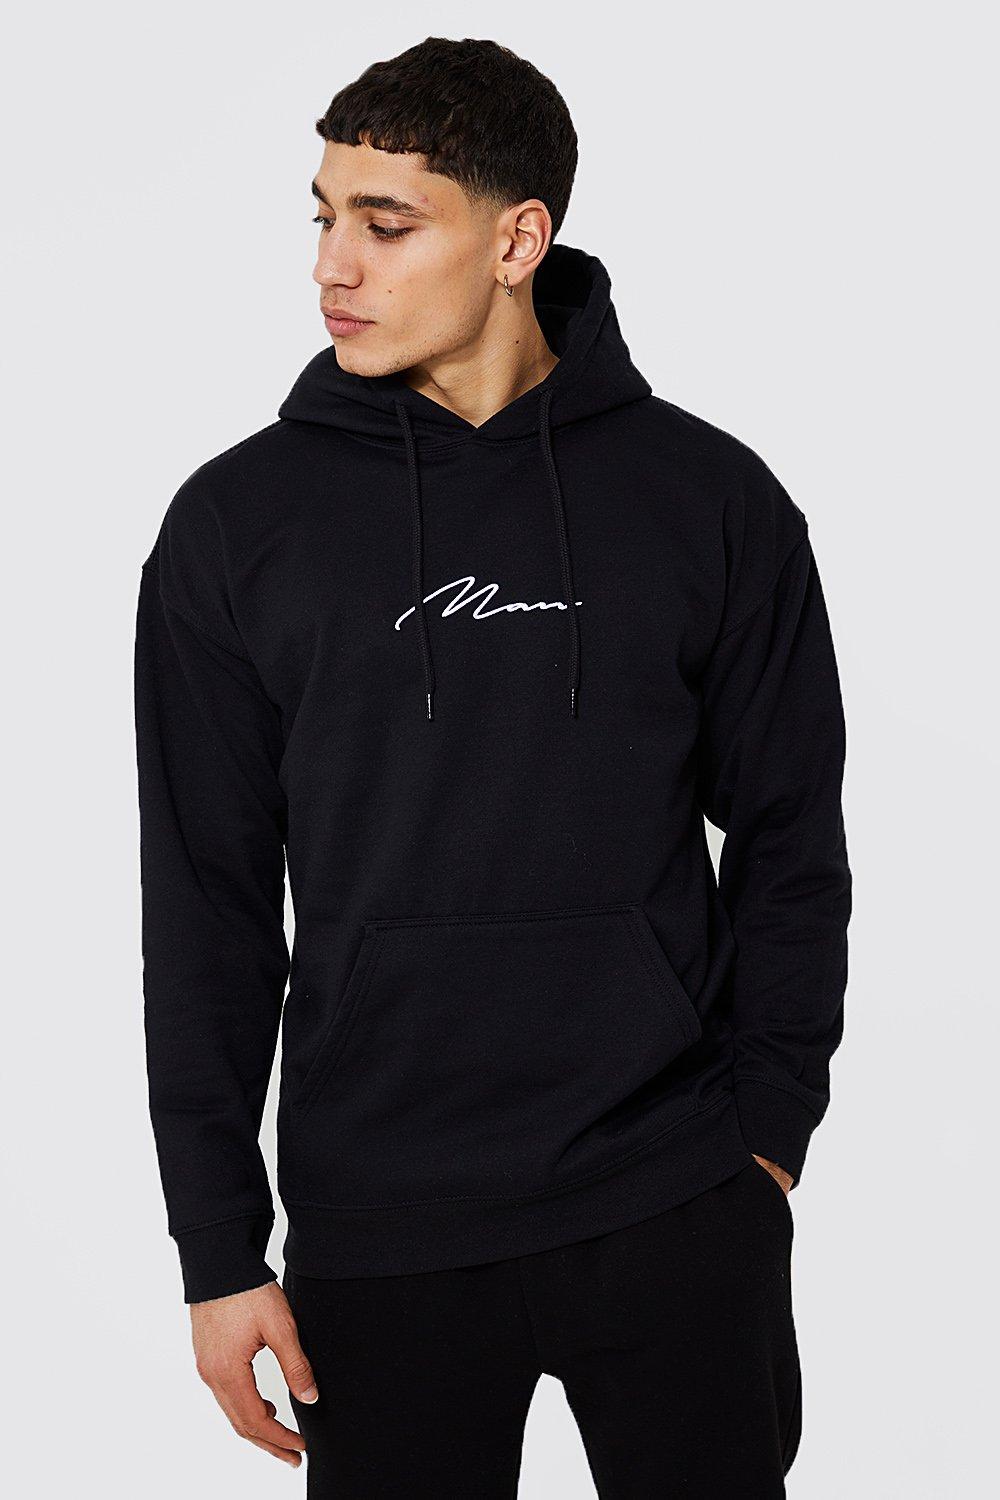 BoohooMAN Tall Man Signature Embroidered Hoodie in Green for Men